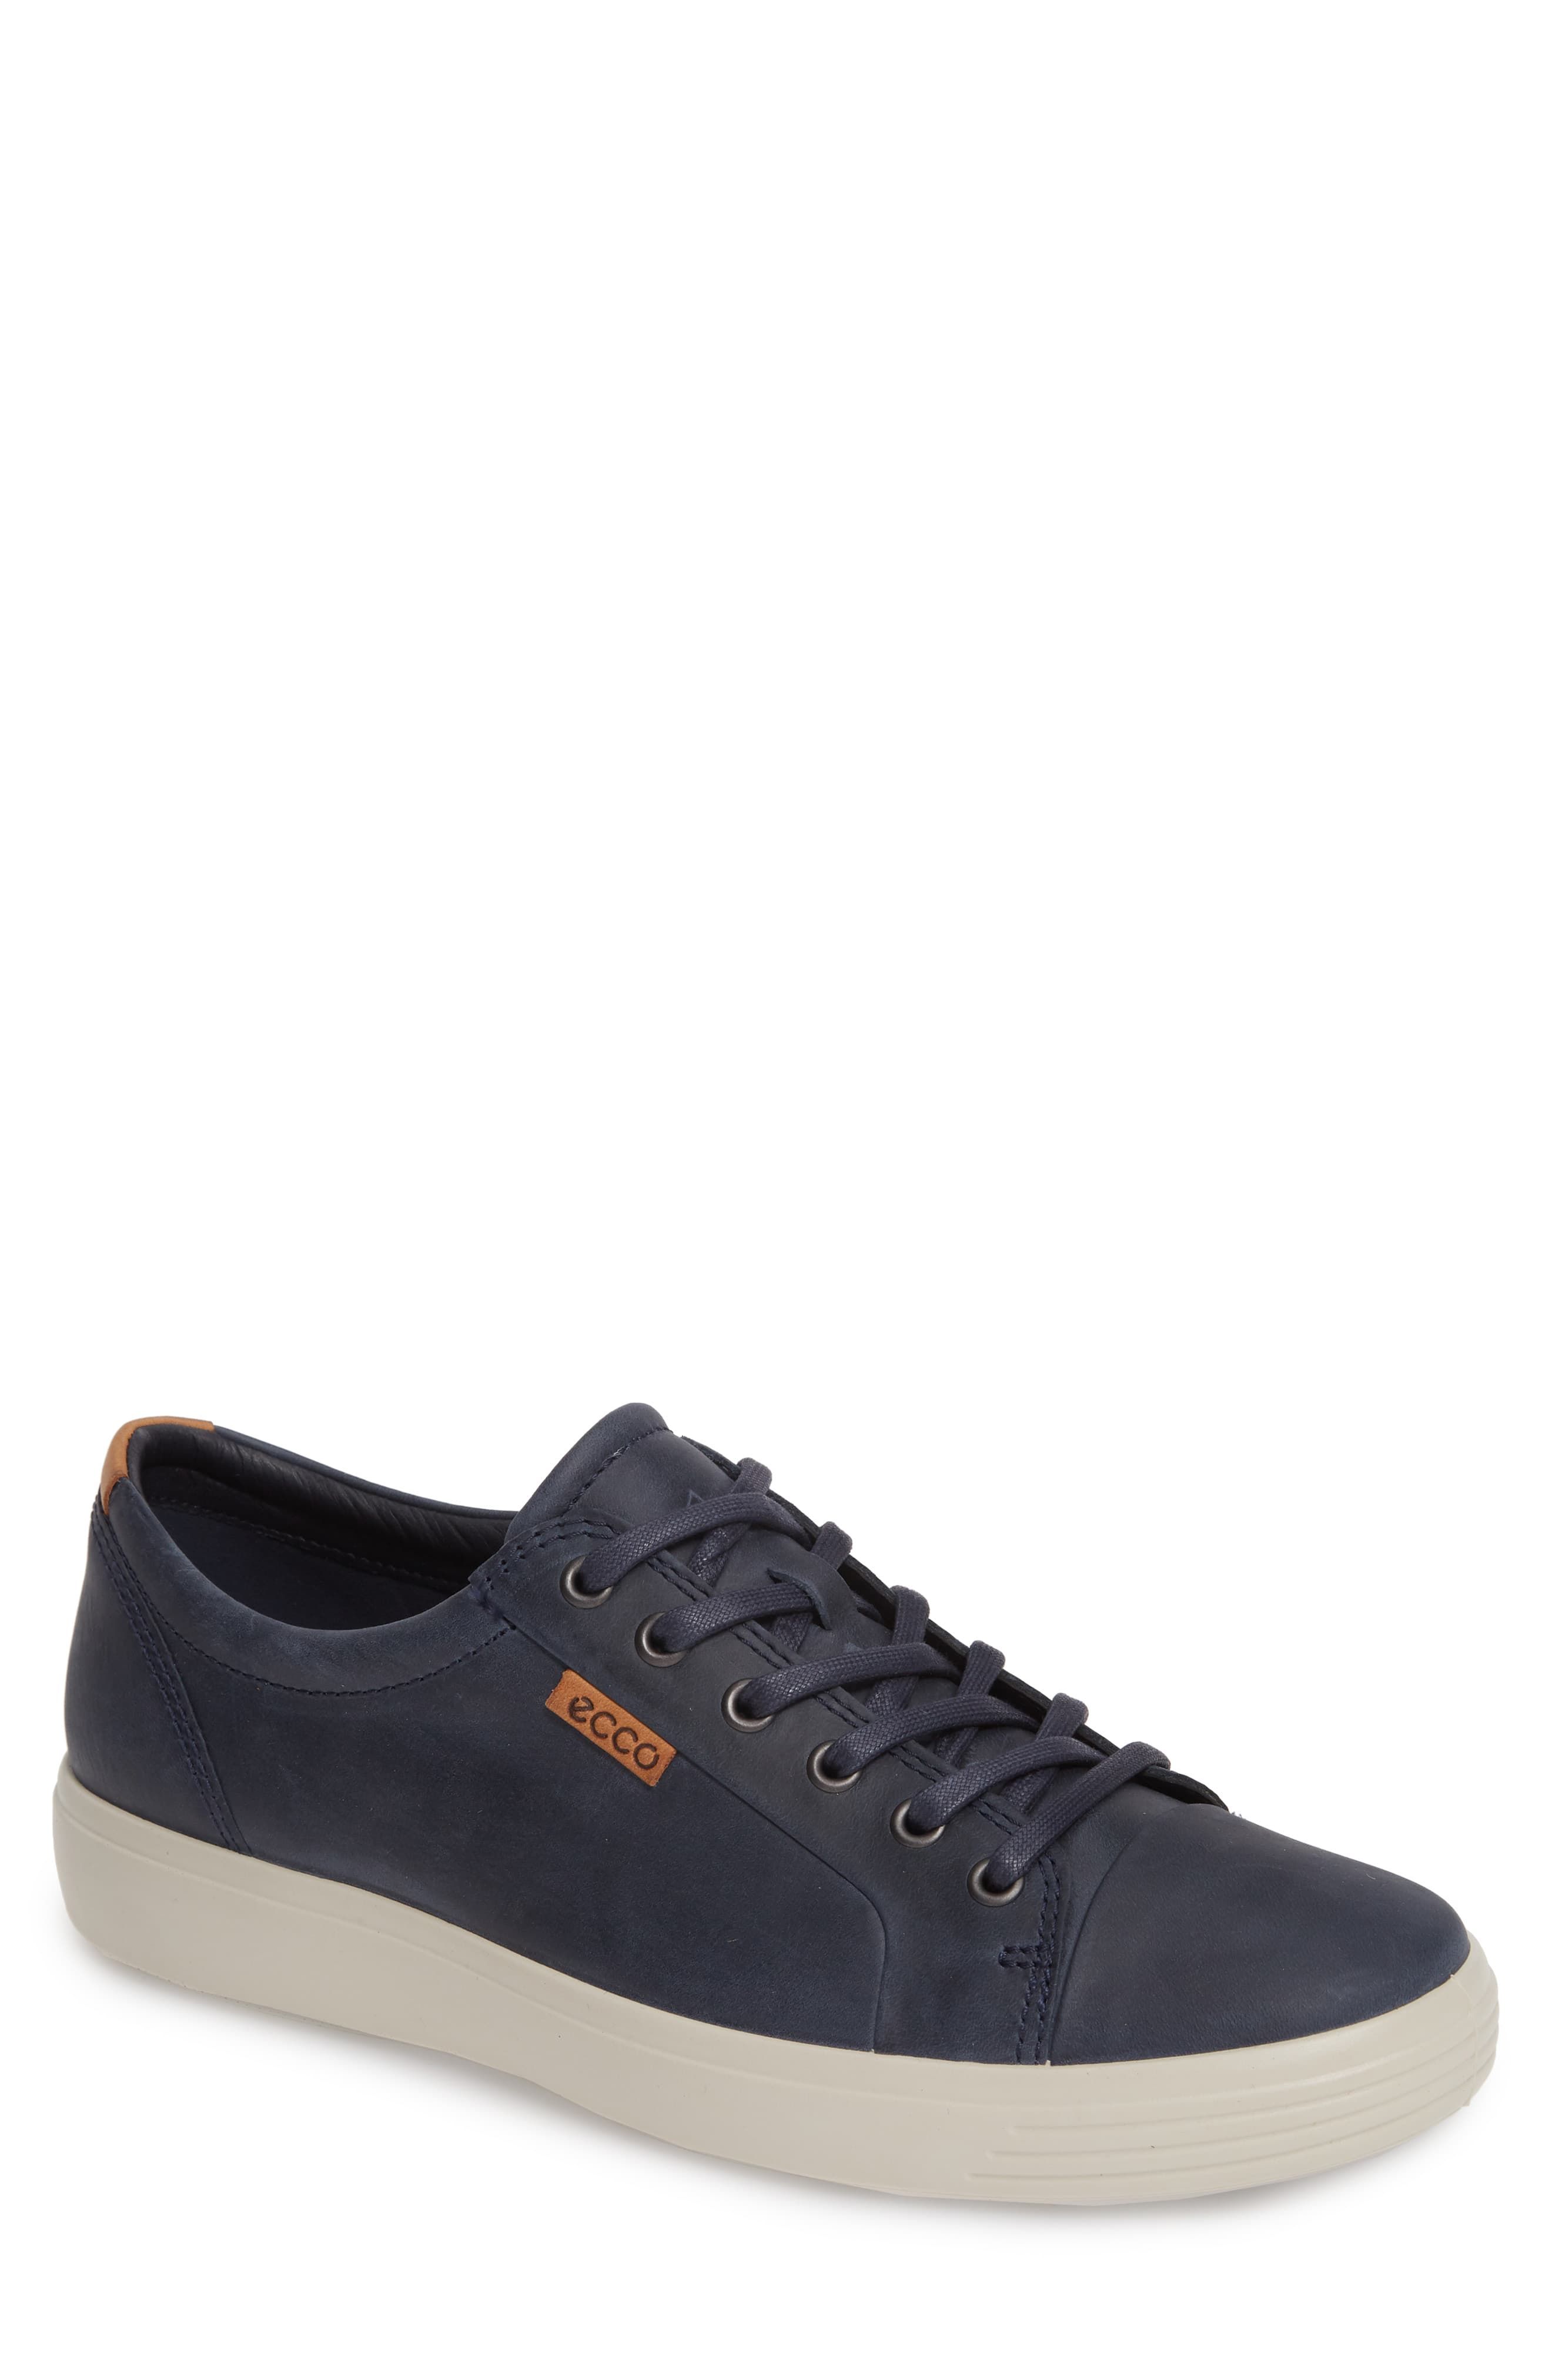 Soft VII Lace-Up Sneaker